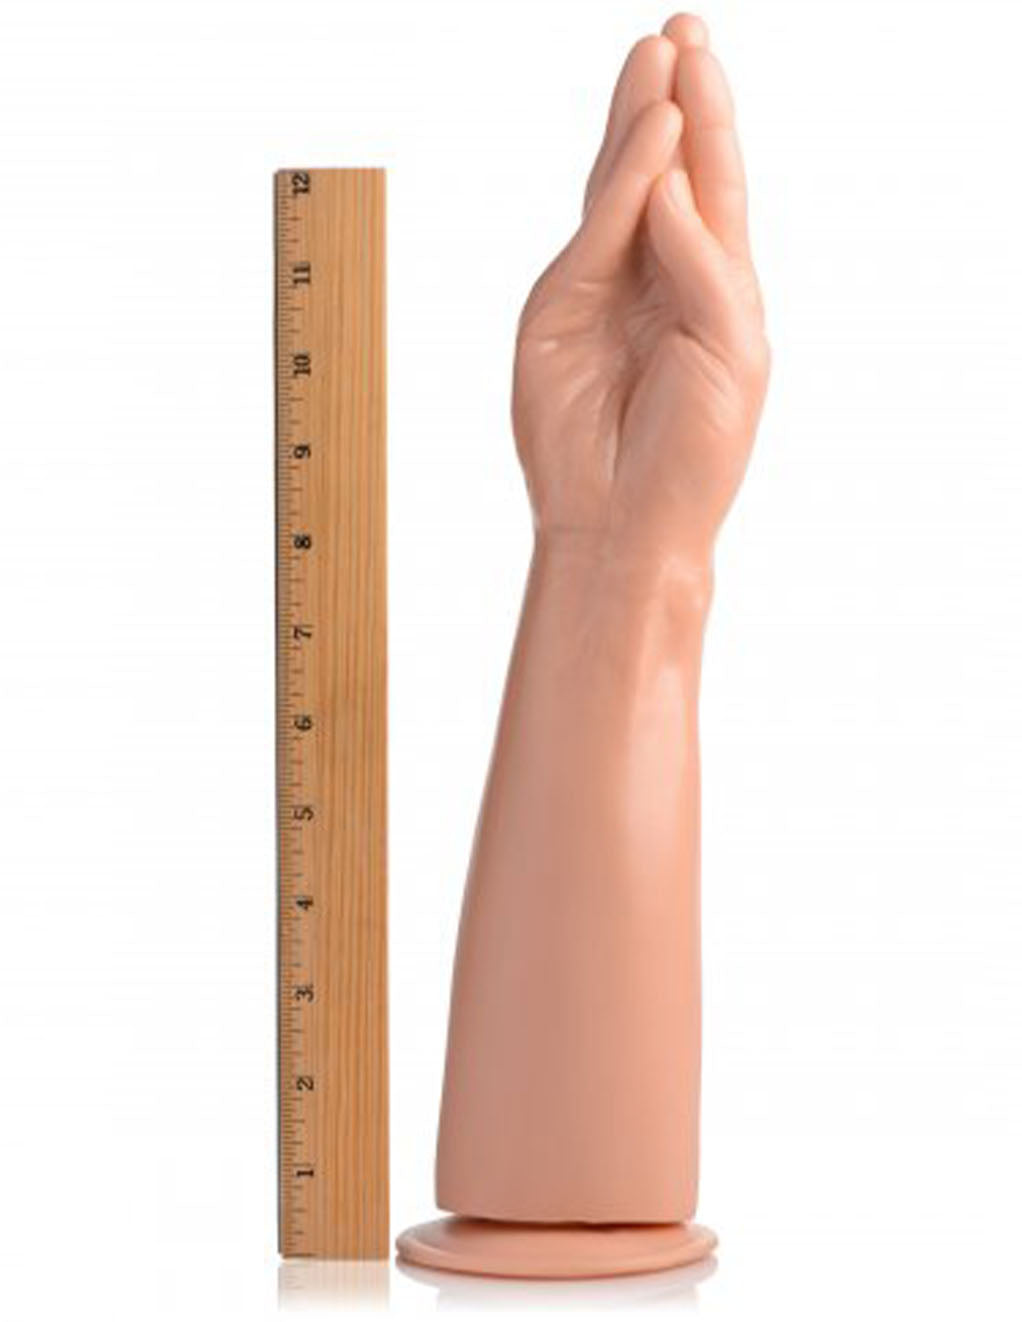 Master Series The Fister Hand and Forearm Dildo- Length measurement